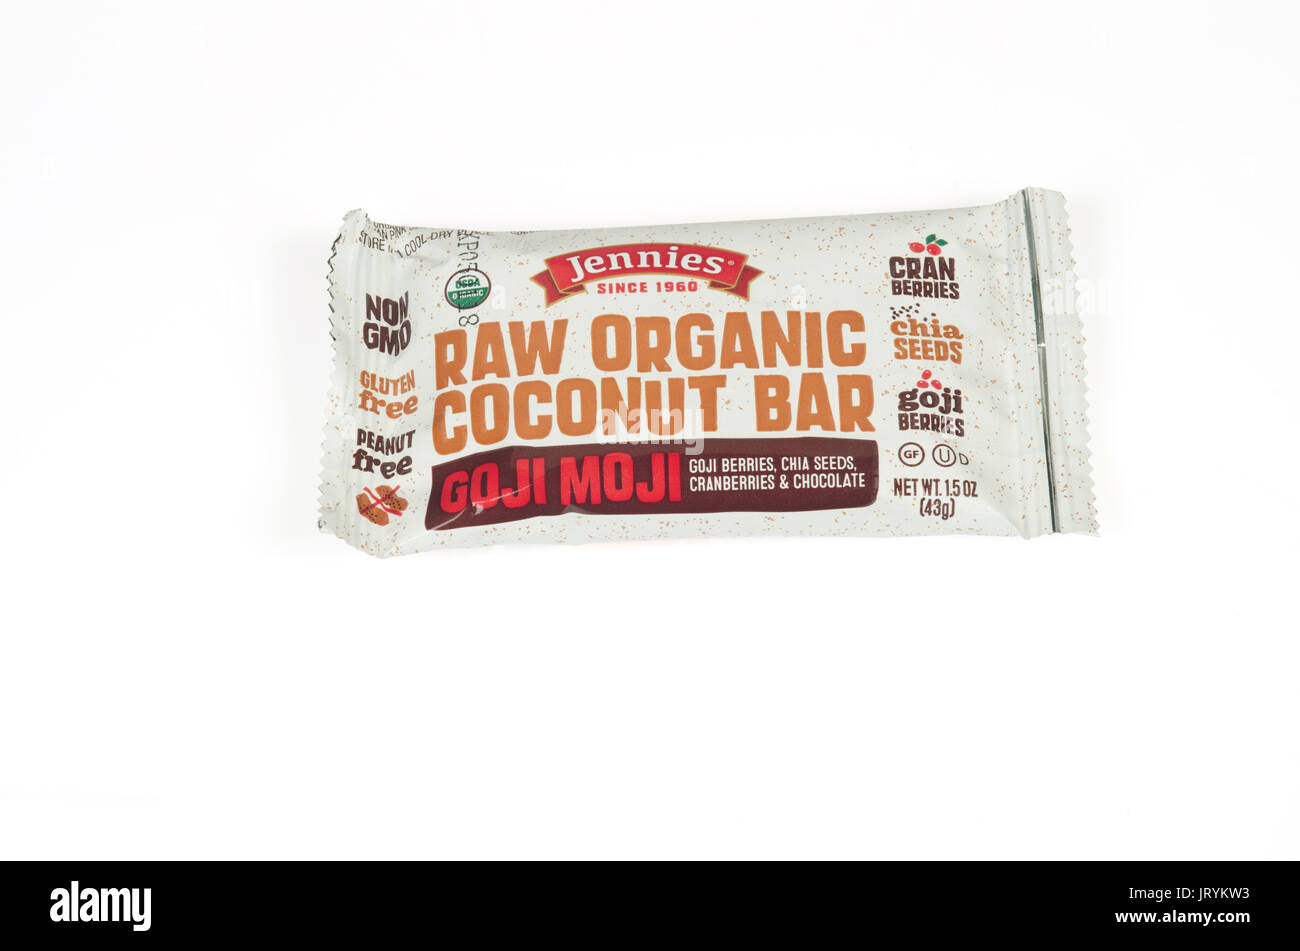 Jennie's Raw Organic Coconut Bar in wrapper on white background Stock Photo